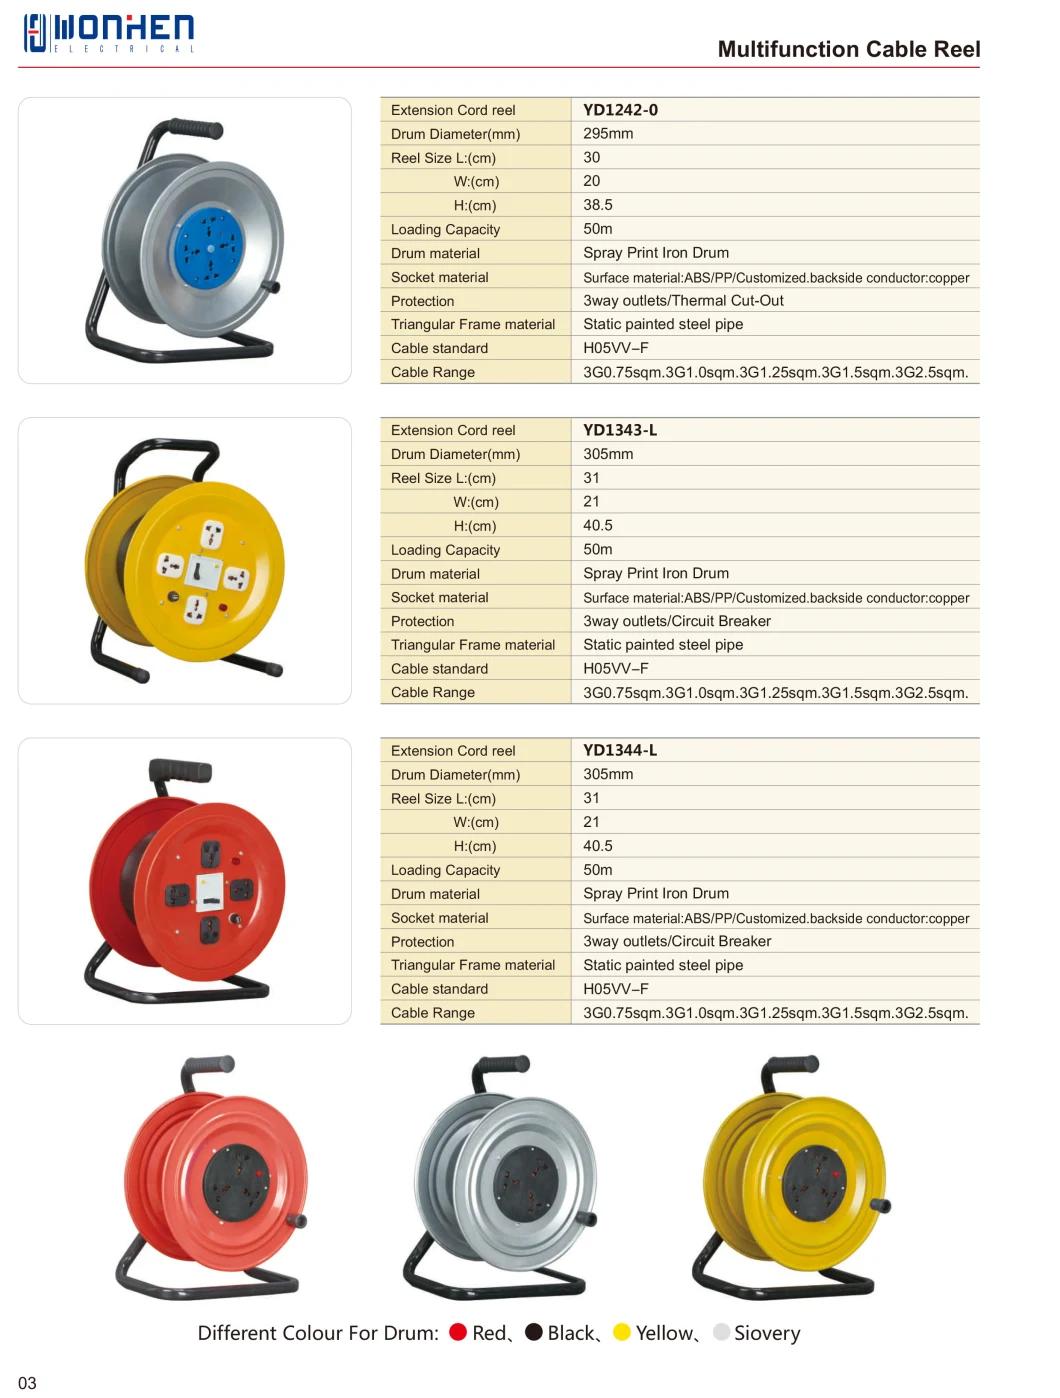 Cable Reel 4 Outlet Extension Cord Reel, 15m, 20m, 25m, 30m, 50m and Custom Length Italy Power Cord Imq Safety Approved